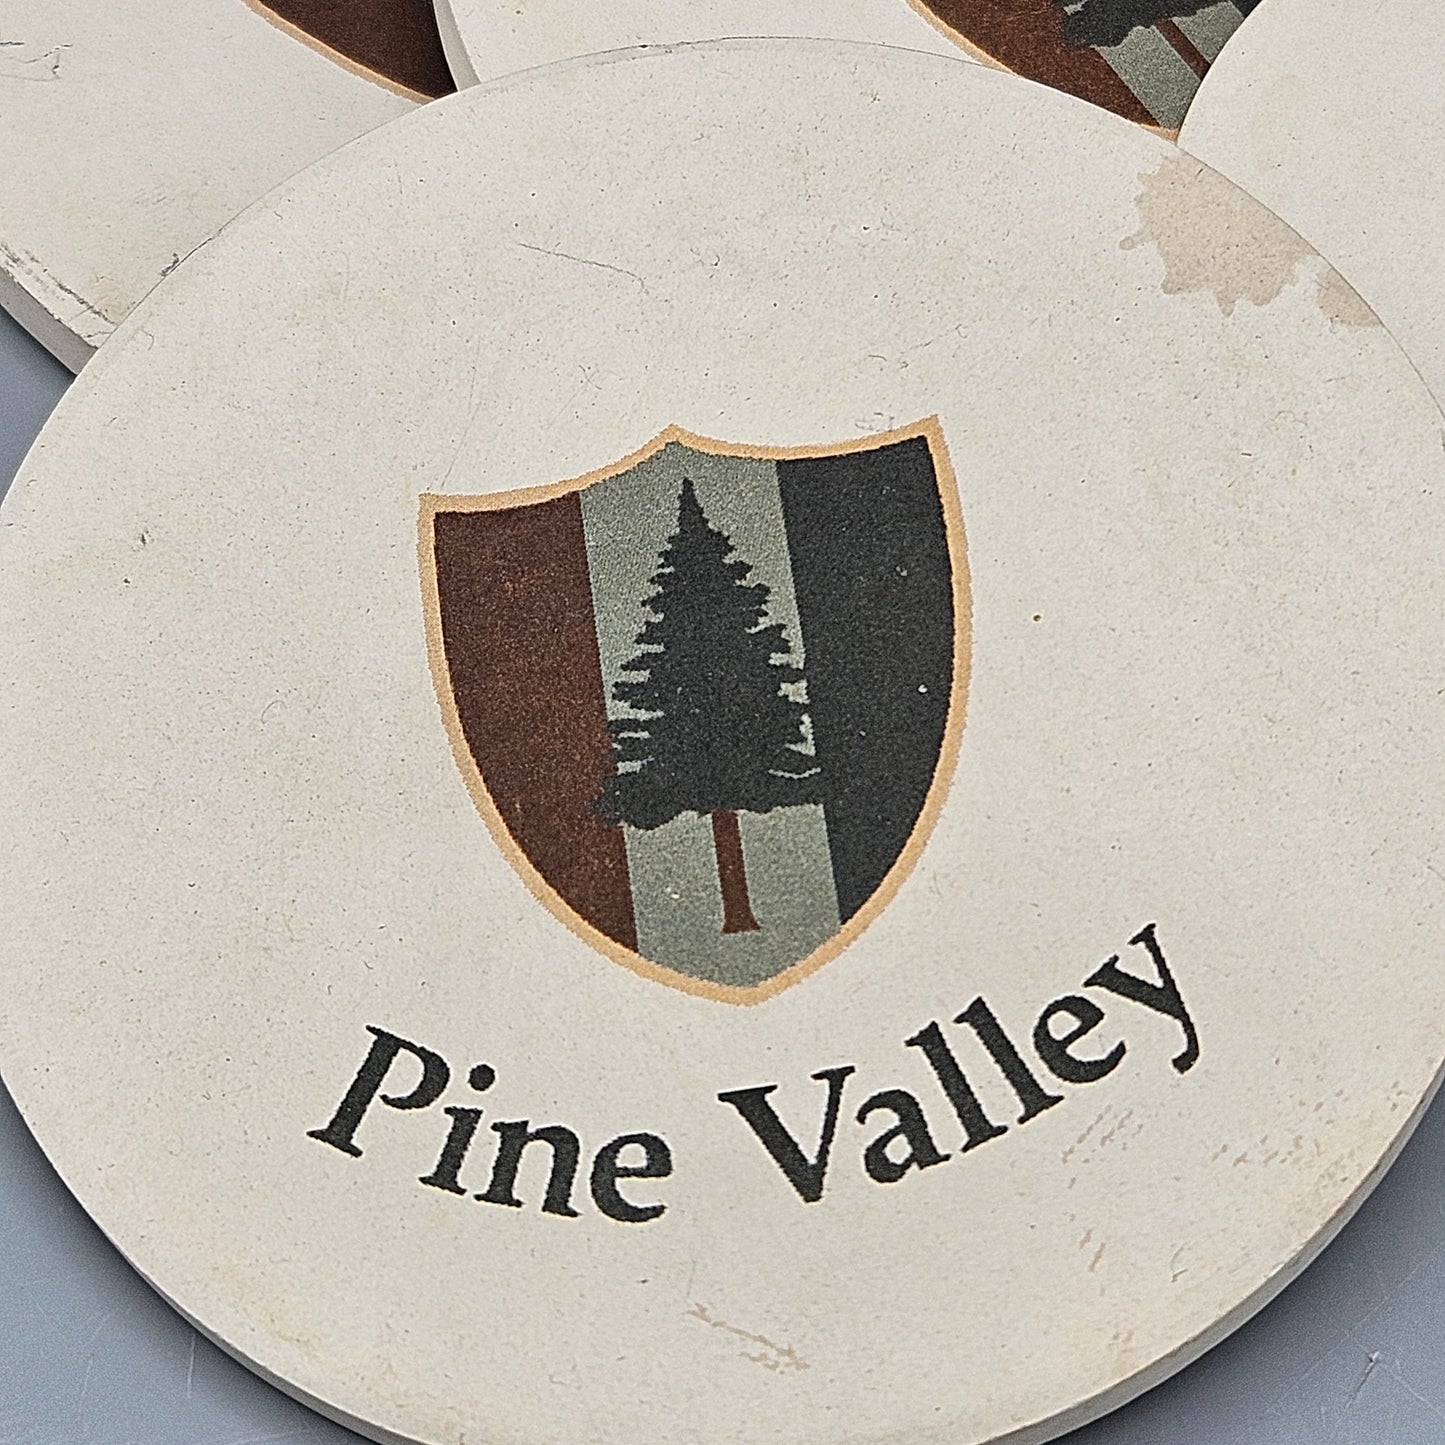 Set of 4 Pine Valley Golf Course Stone Drink Coasters